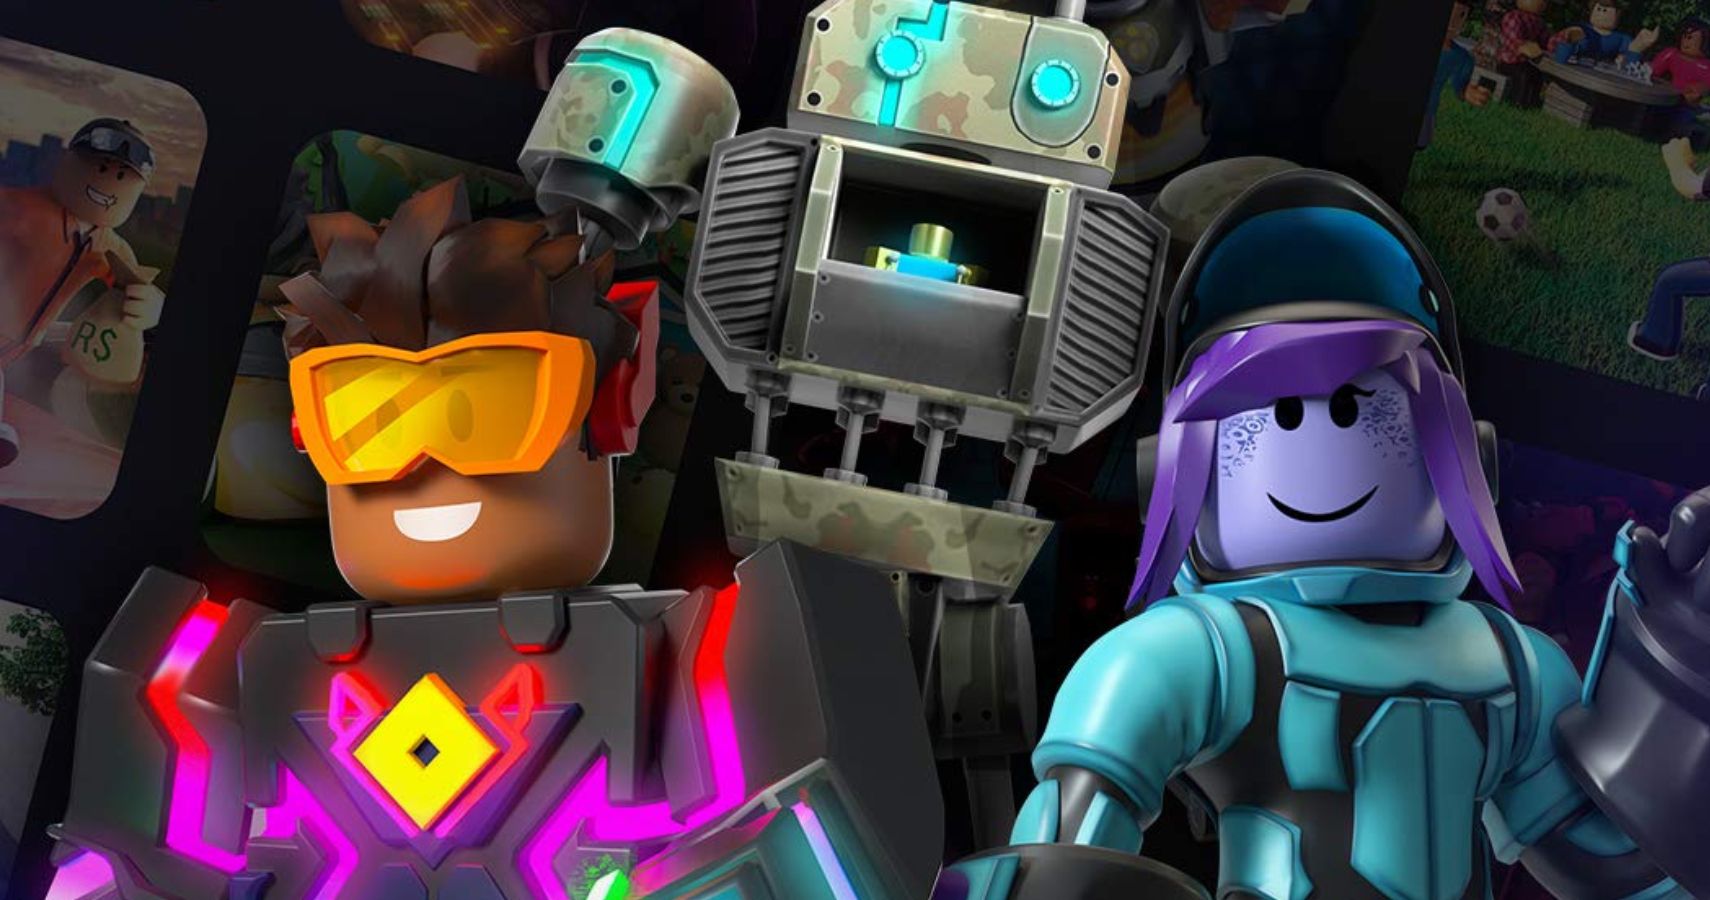 Prime Gaming S First New Benefit Is Exclusive Roblox Content - roblox claim ownership